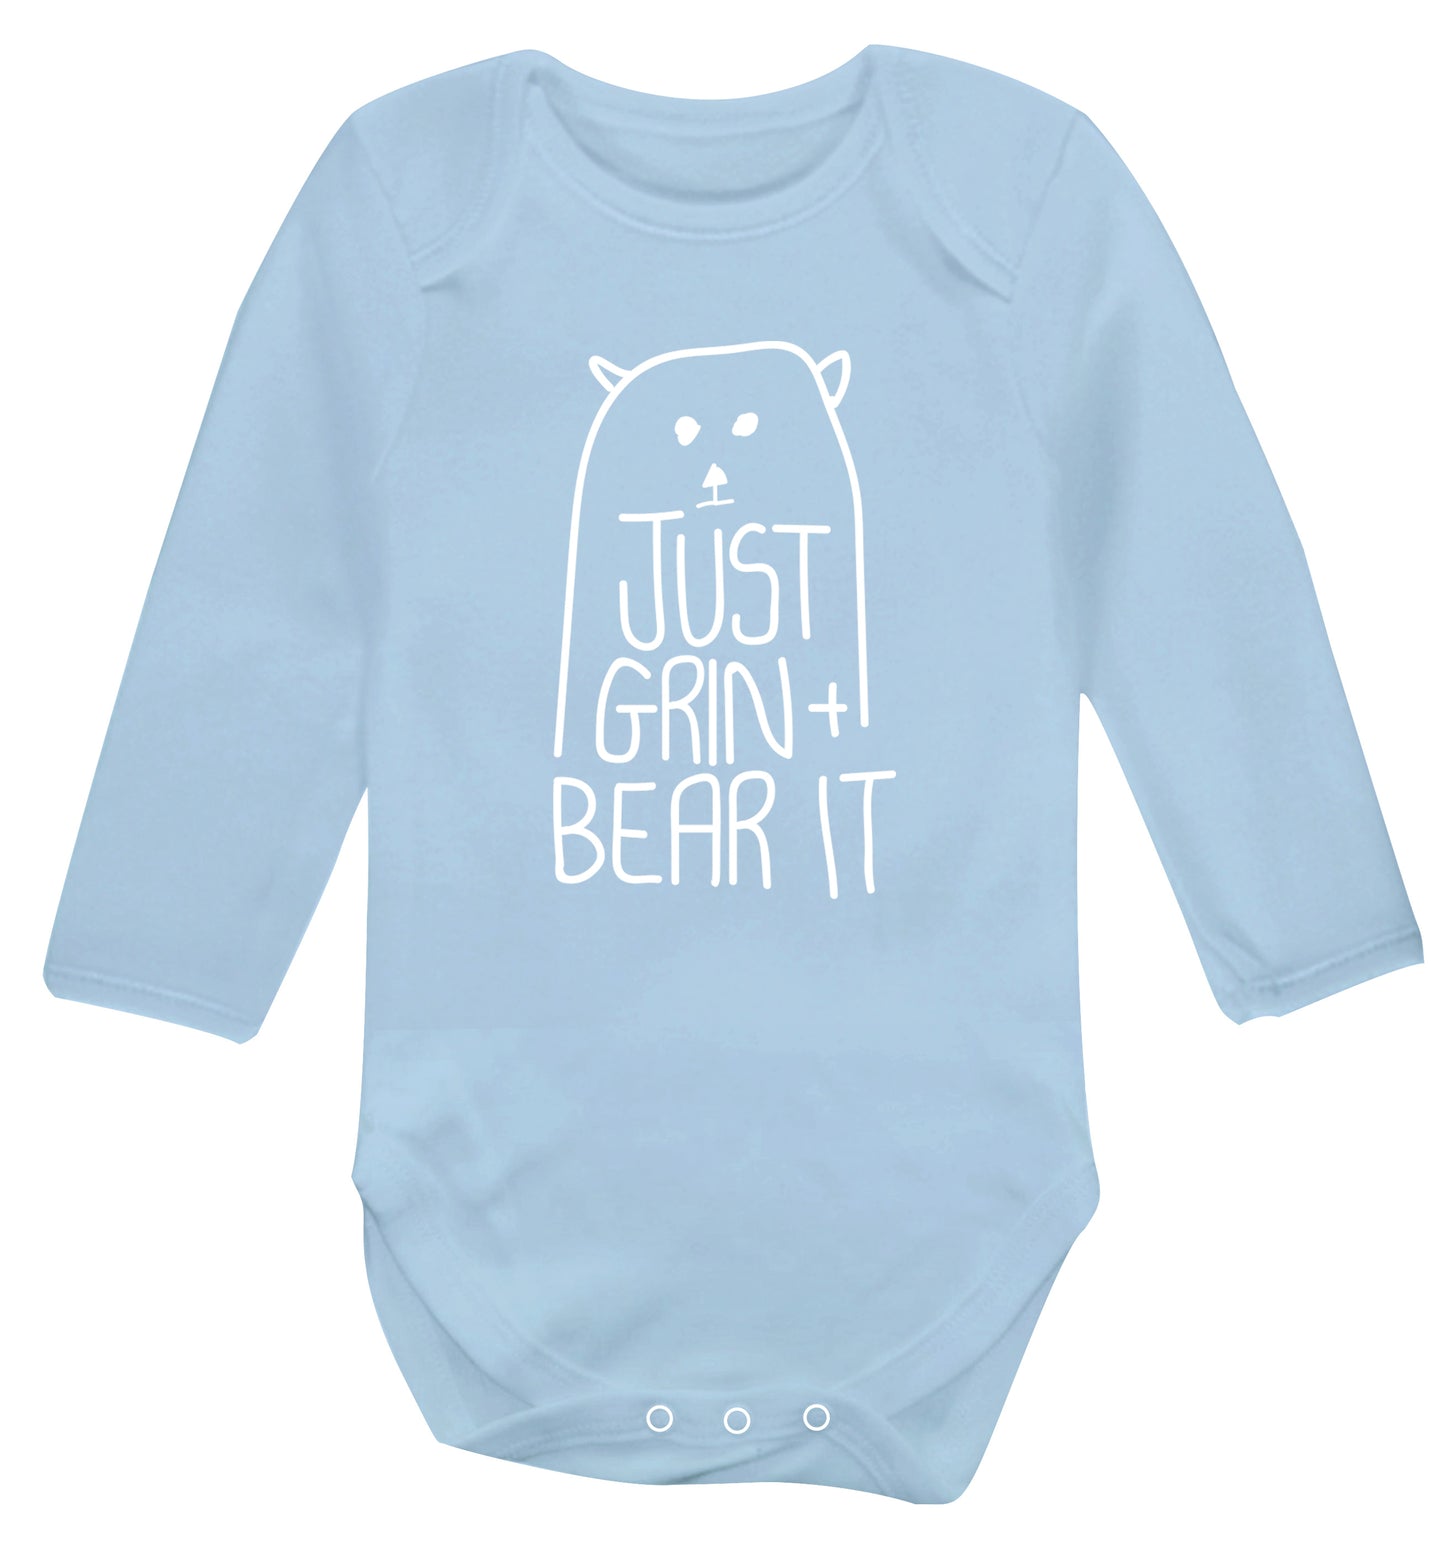 Just grin and bear it Baby Vest long sleeved pale blue 6-12 months